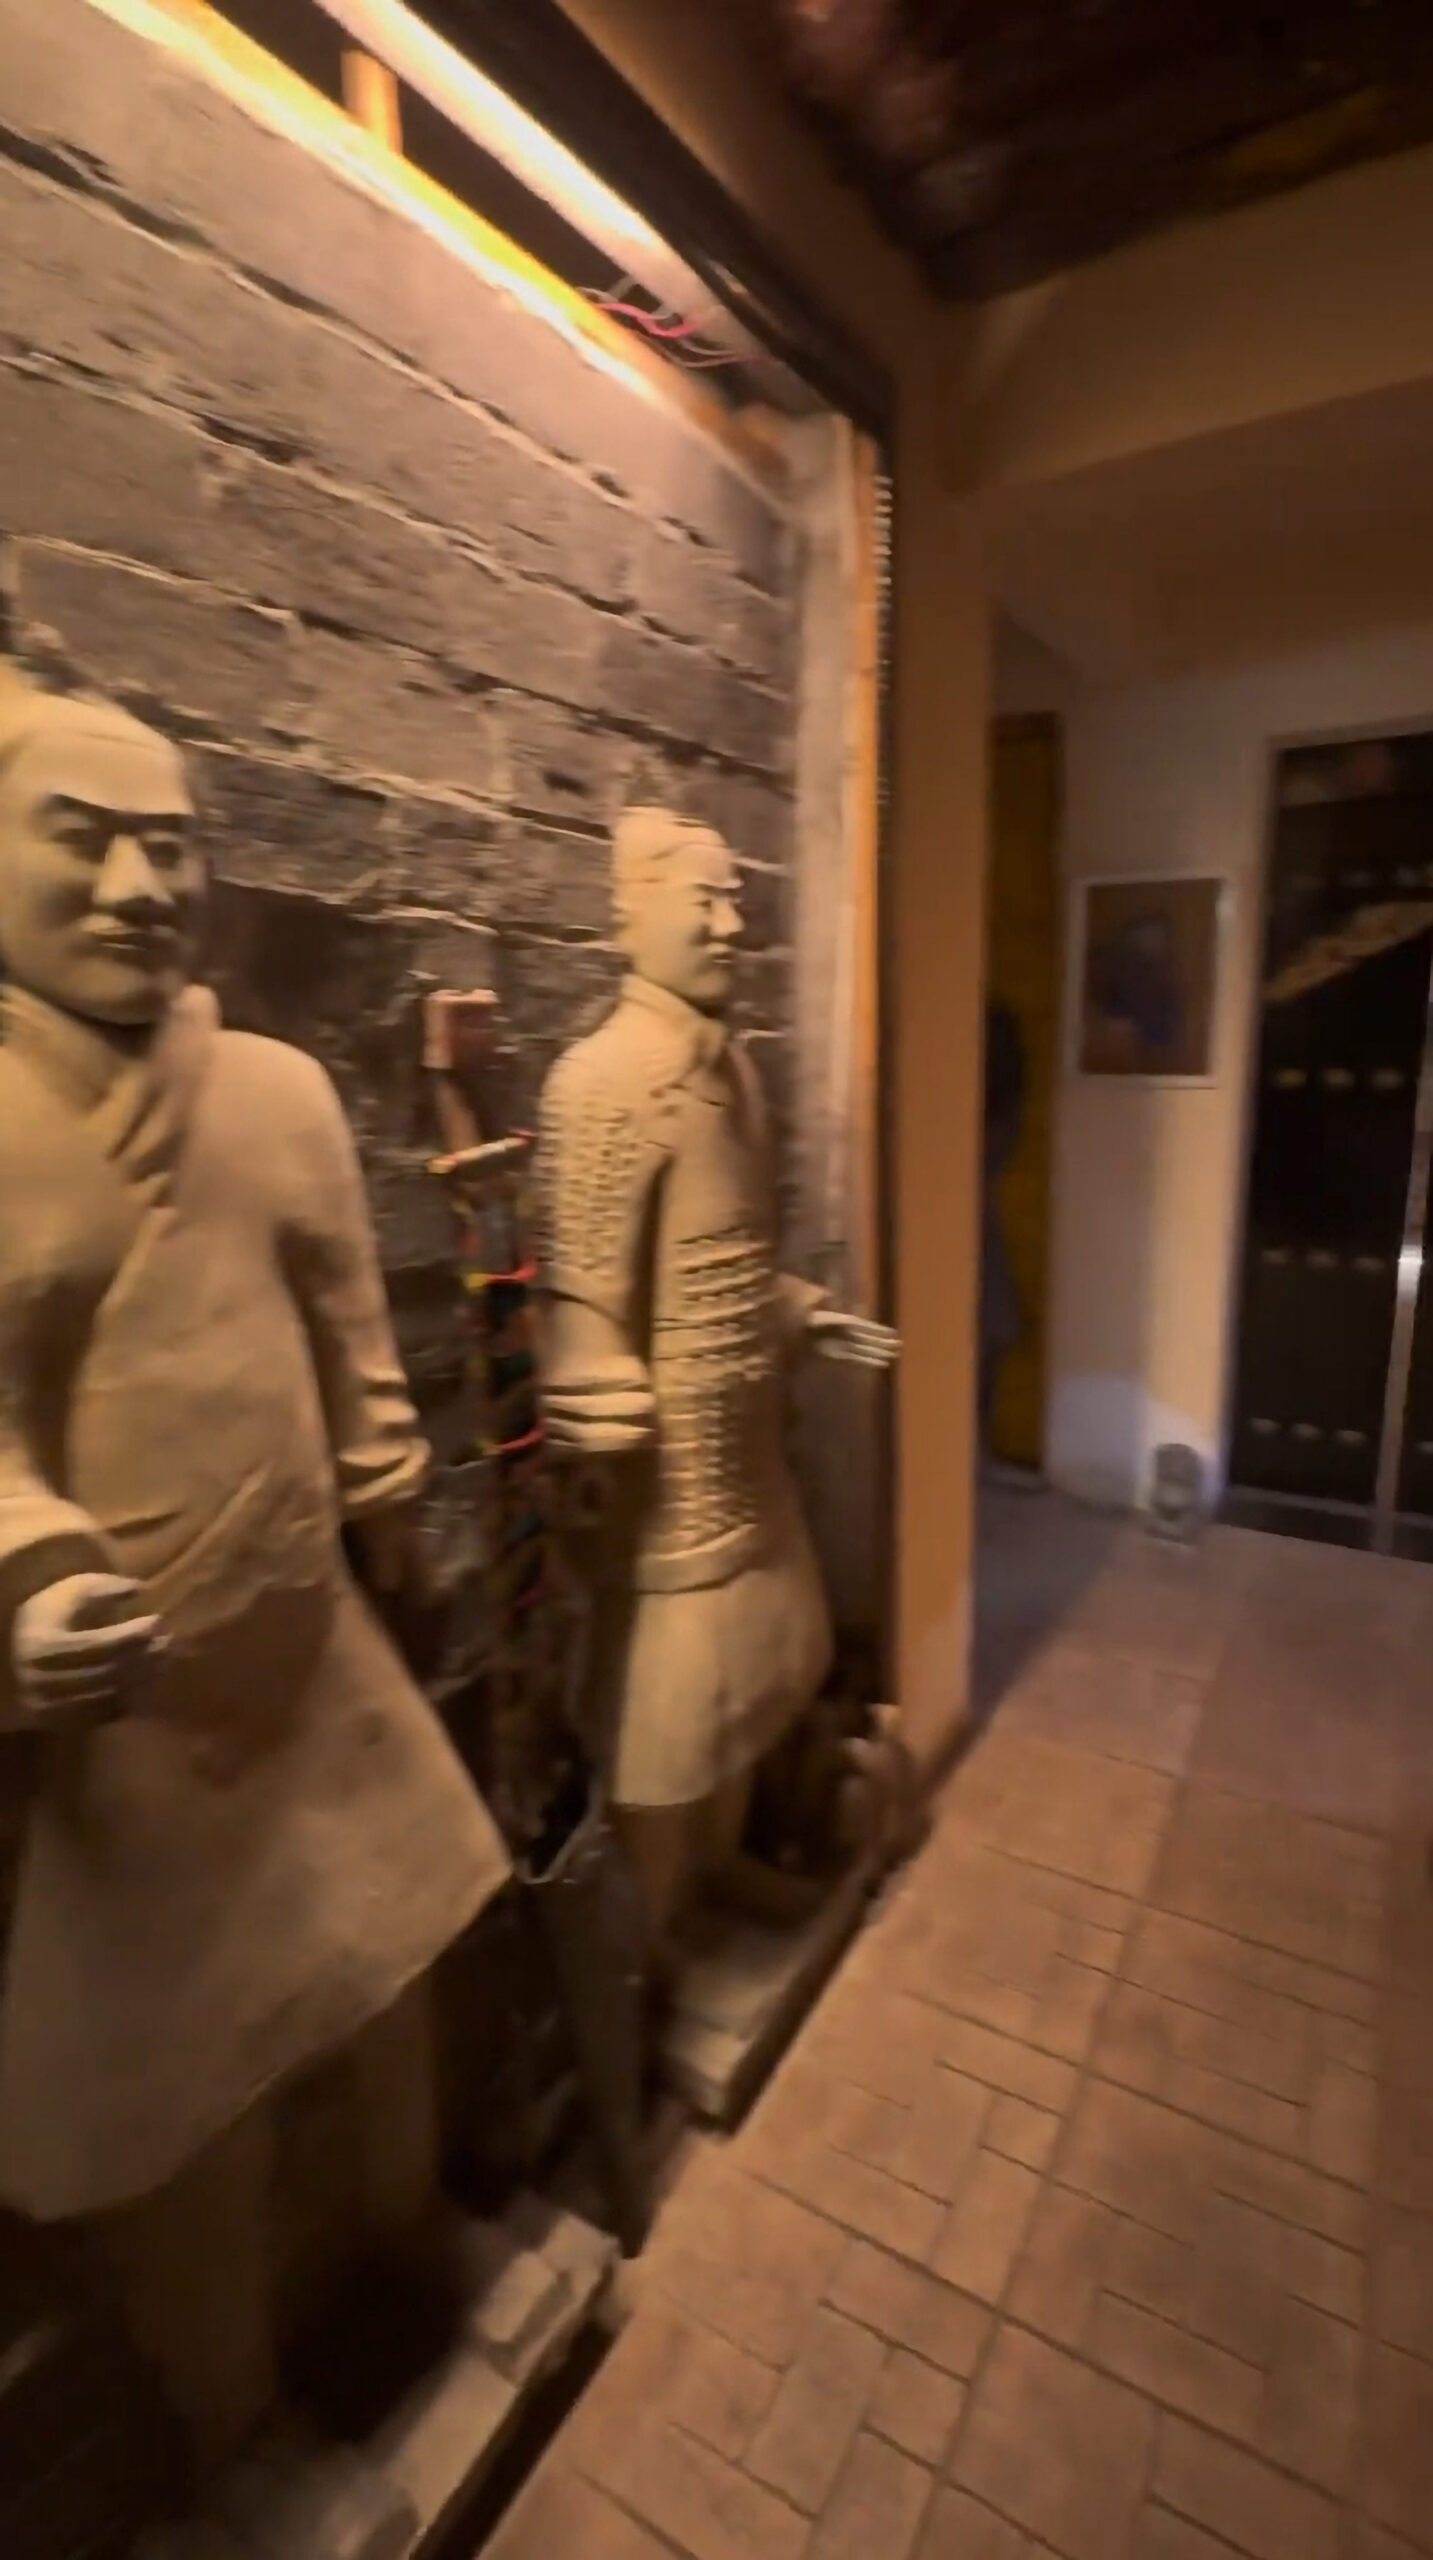 Read more about the article Puzzled Woman Admires Terracotta Army-Themed Hotel Room